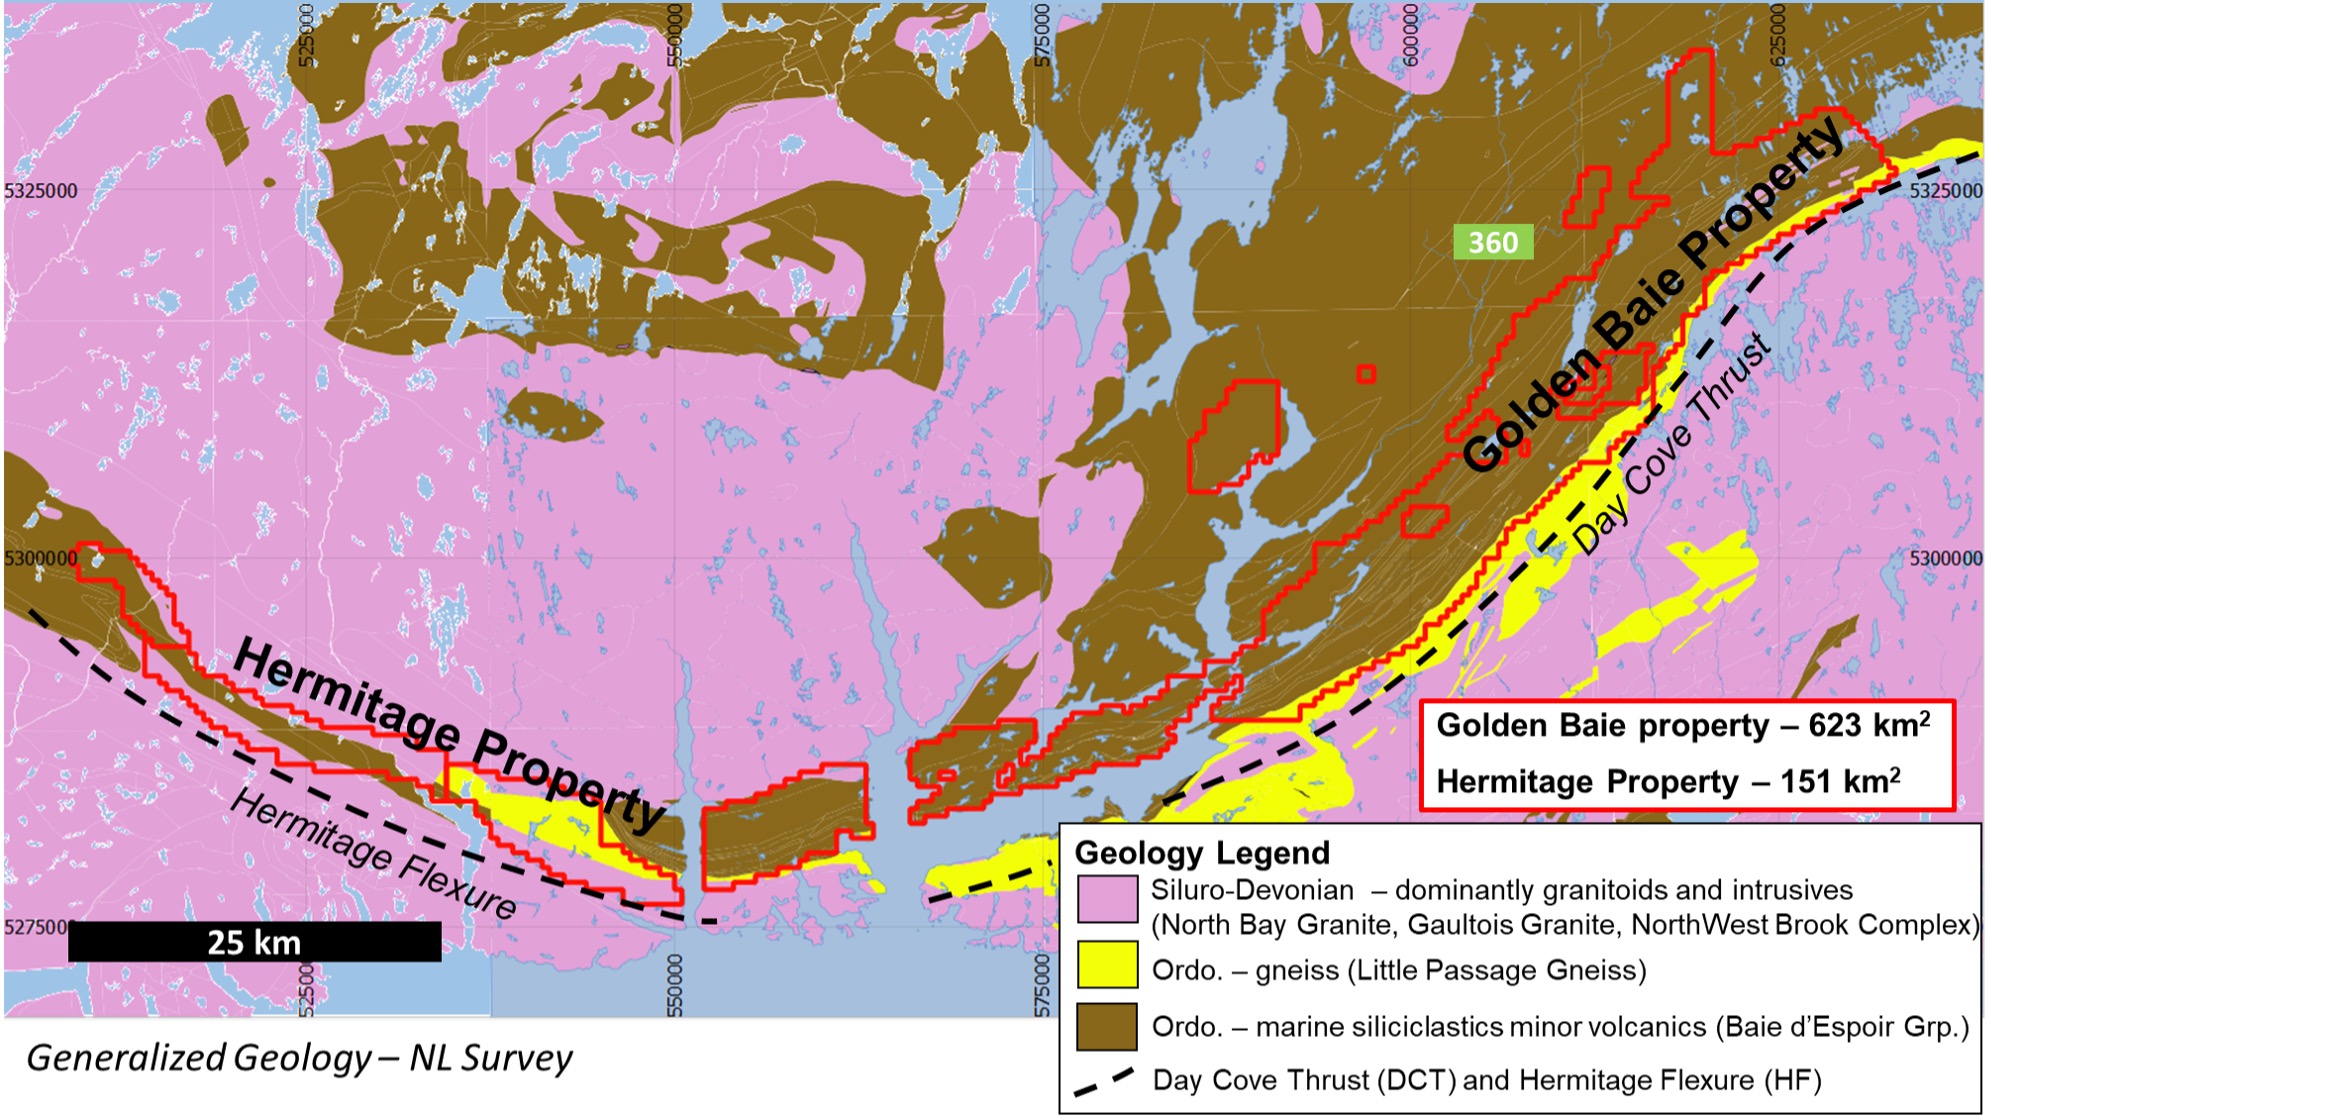 Figure 6 - Generalized geology of the Golden Baie and Hermitage Flexure properties